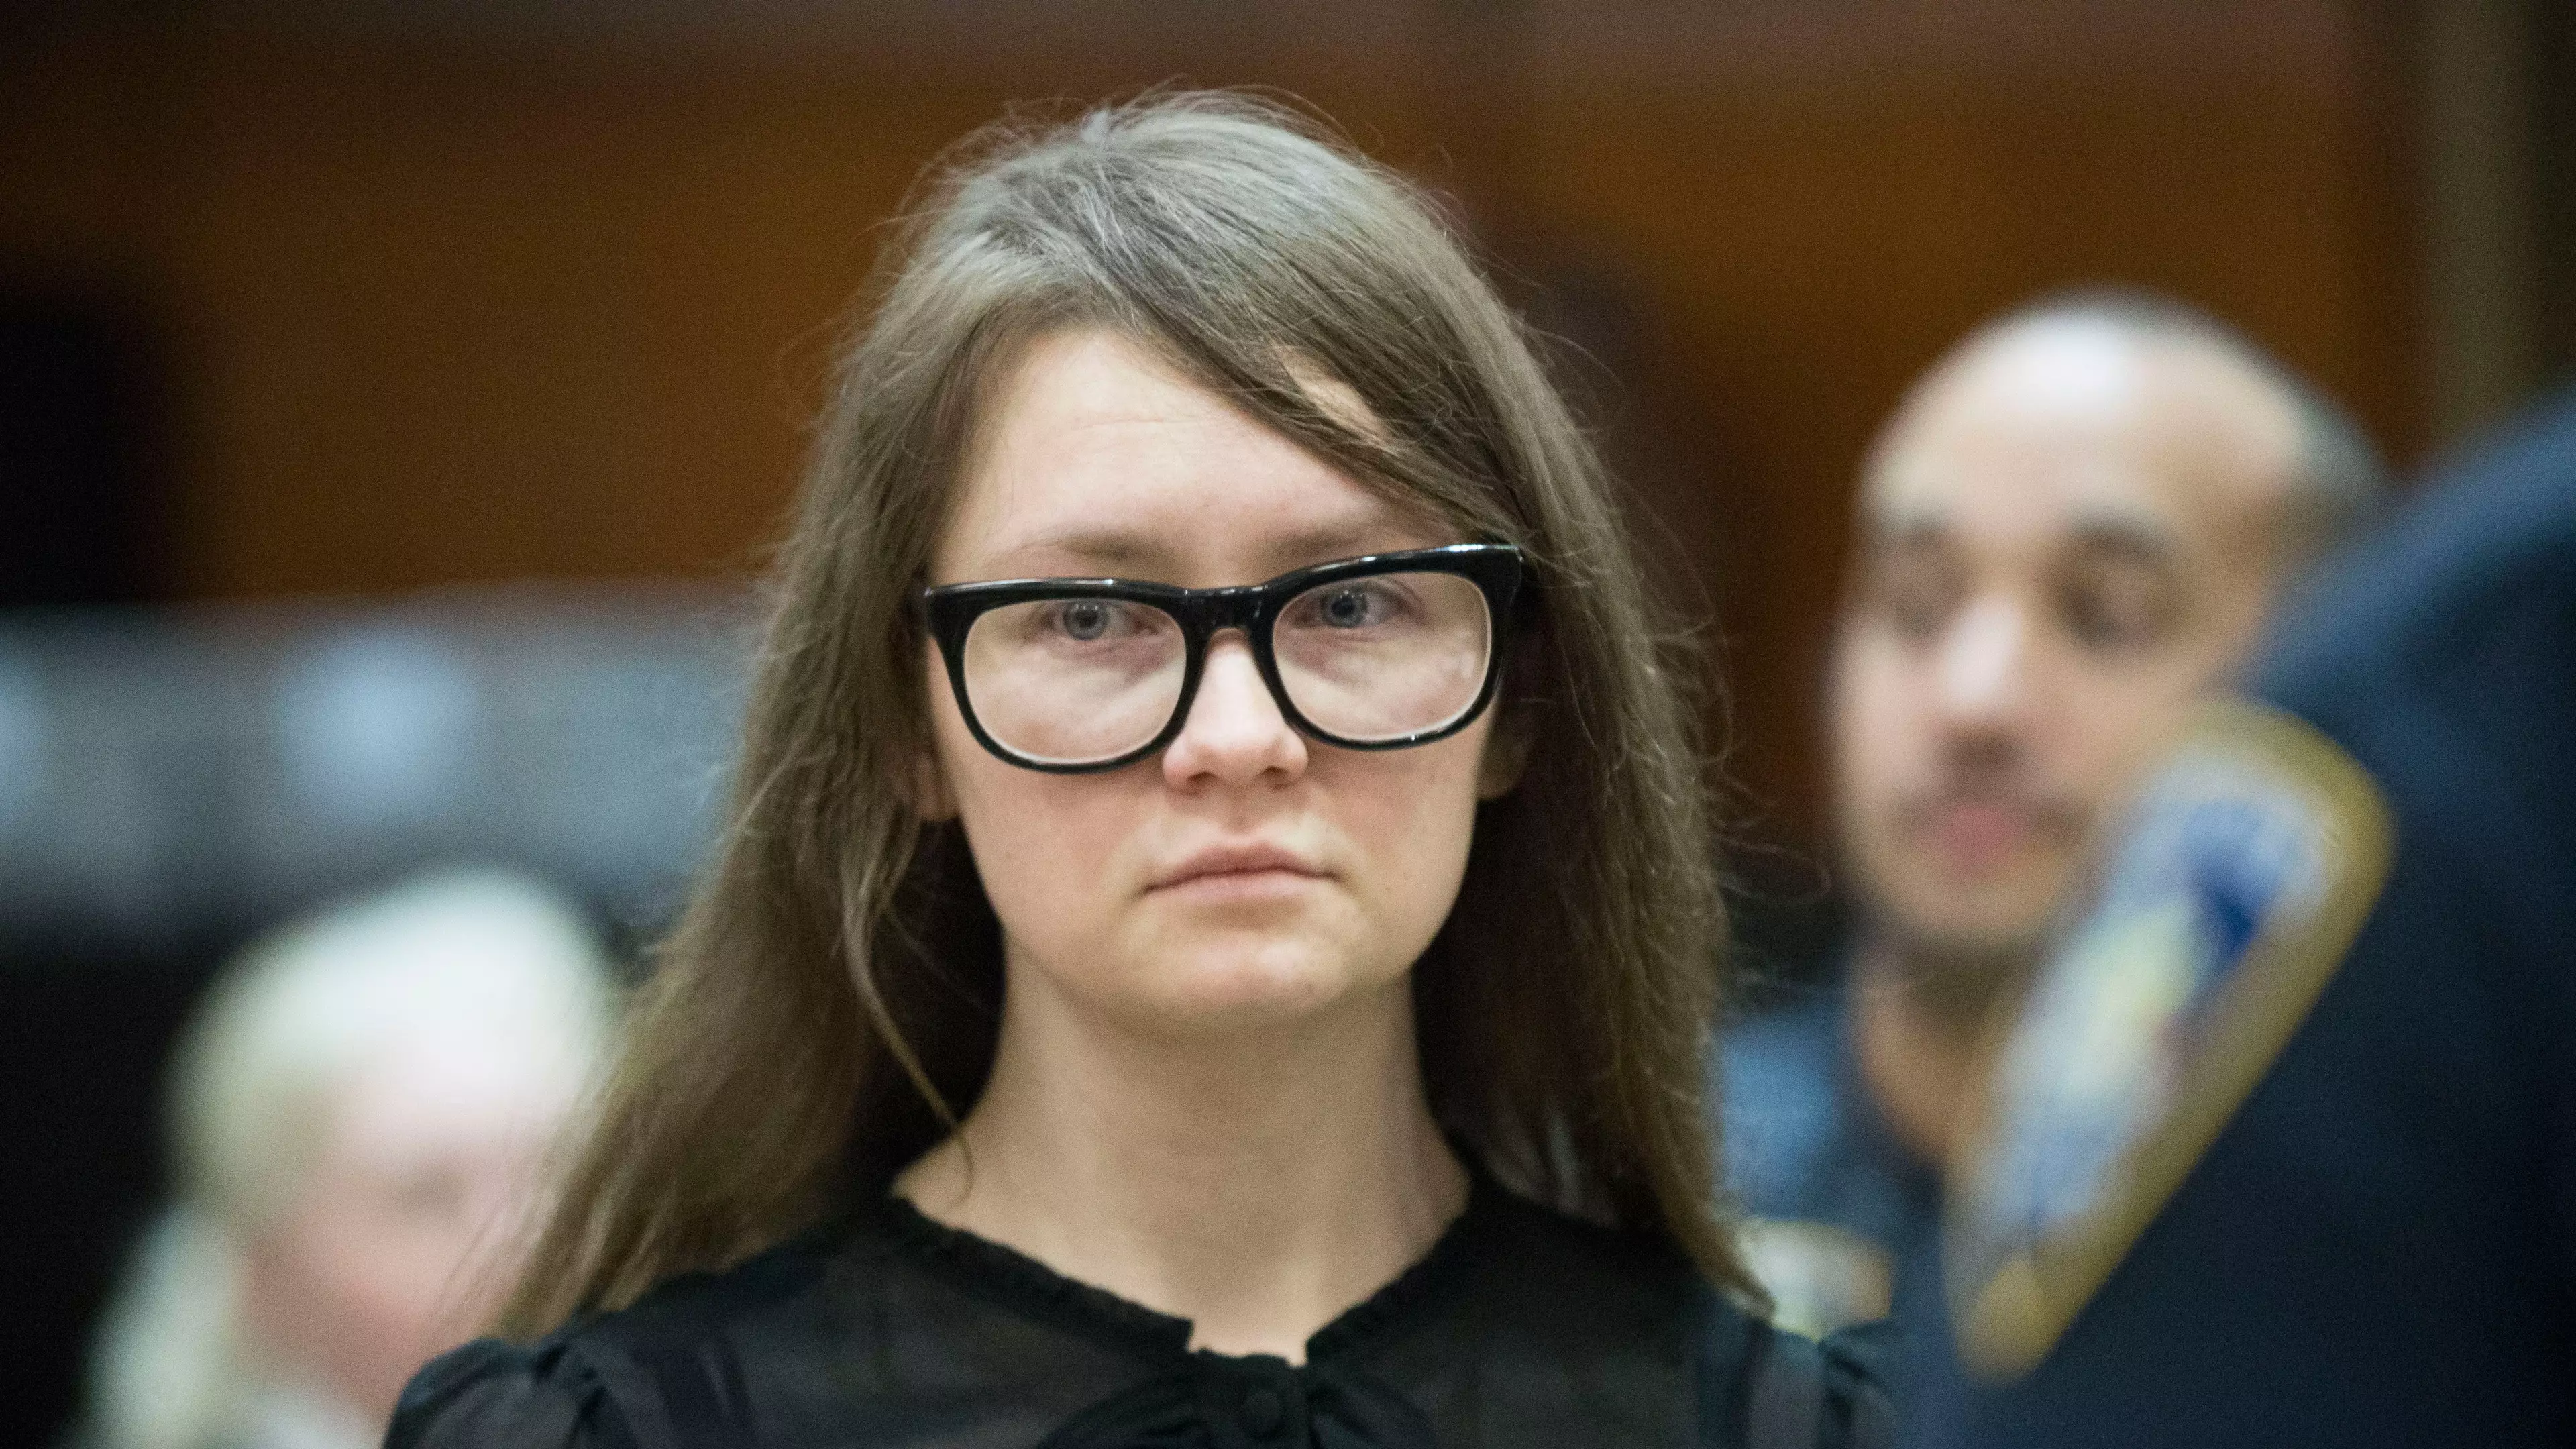 Netflix True Crime Series Inventing Anna Tells The Shocking Story Of Con Artist Anna Delvey 